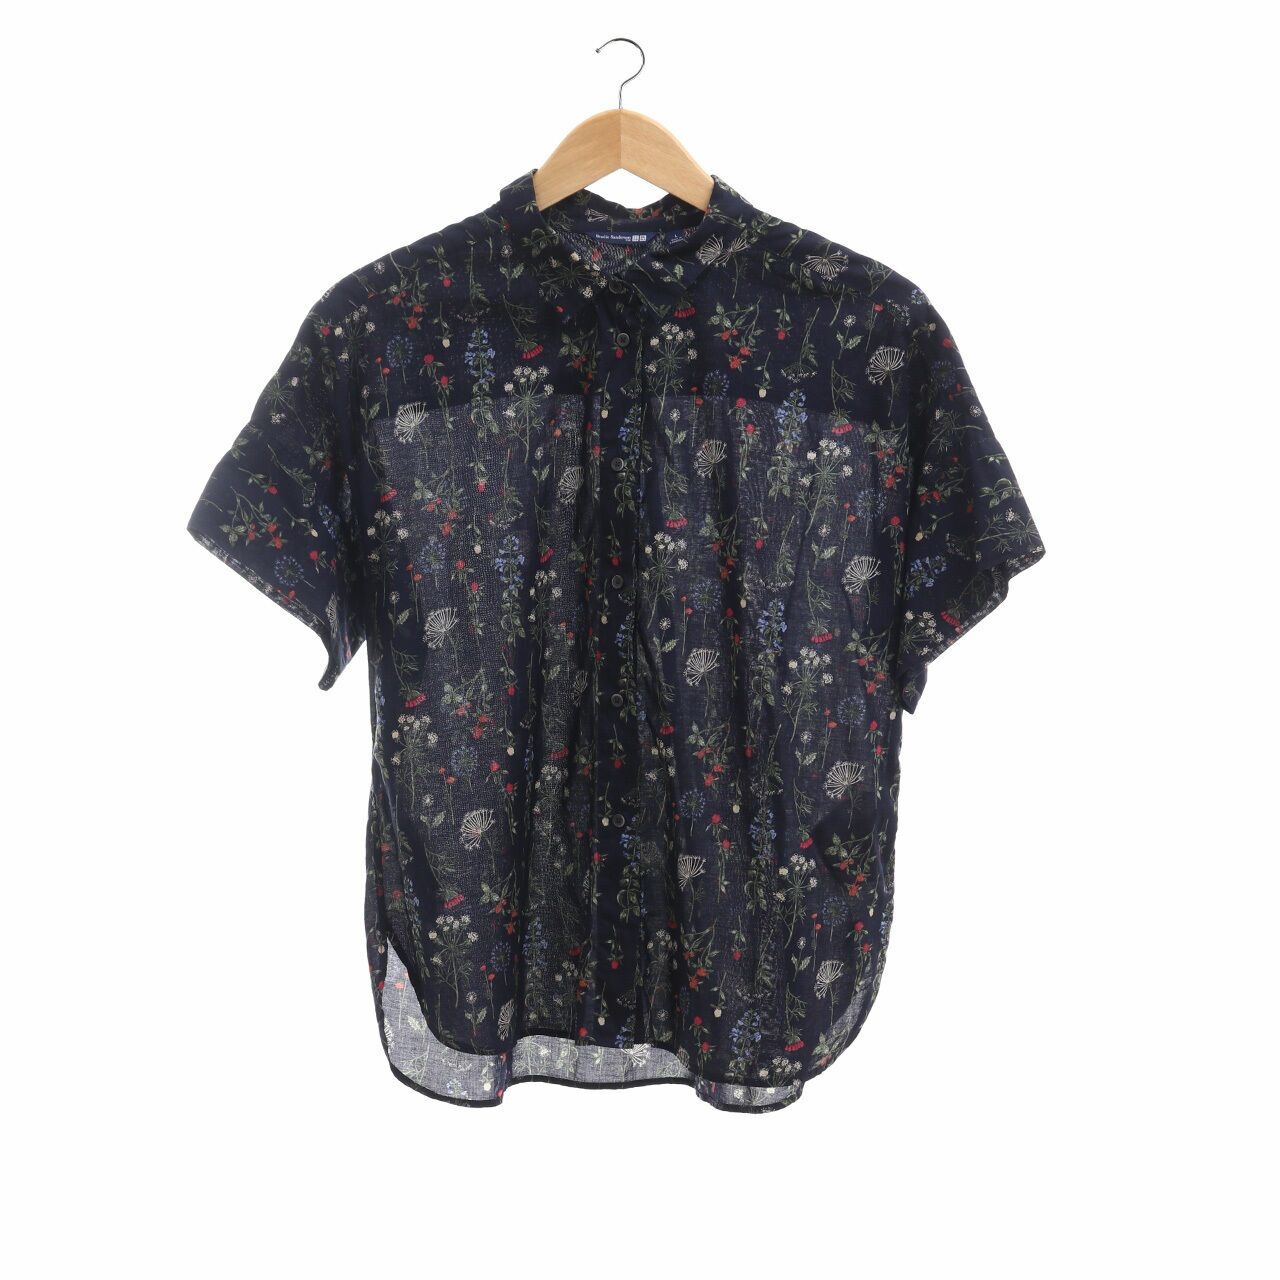 UNIQLO Navy Floral Shirt